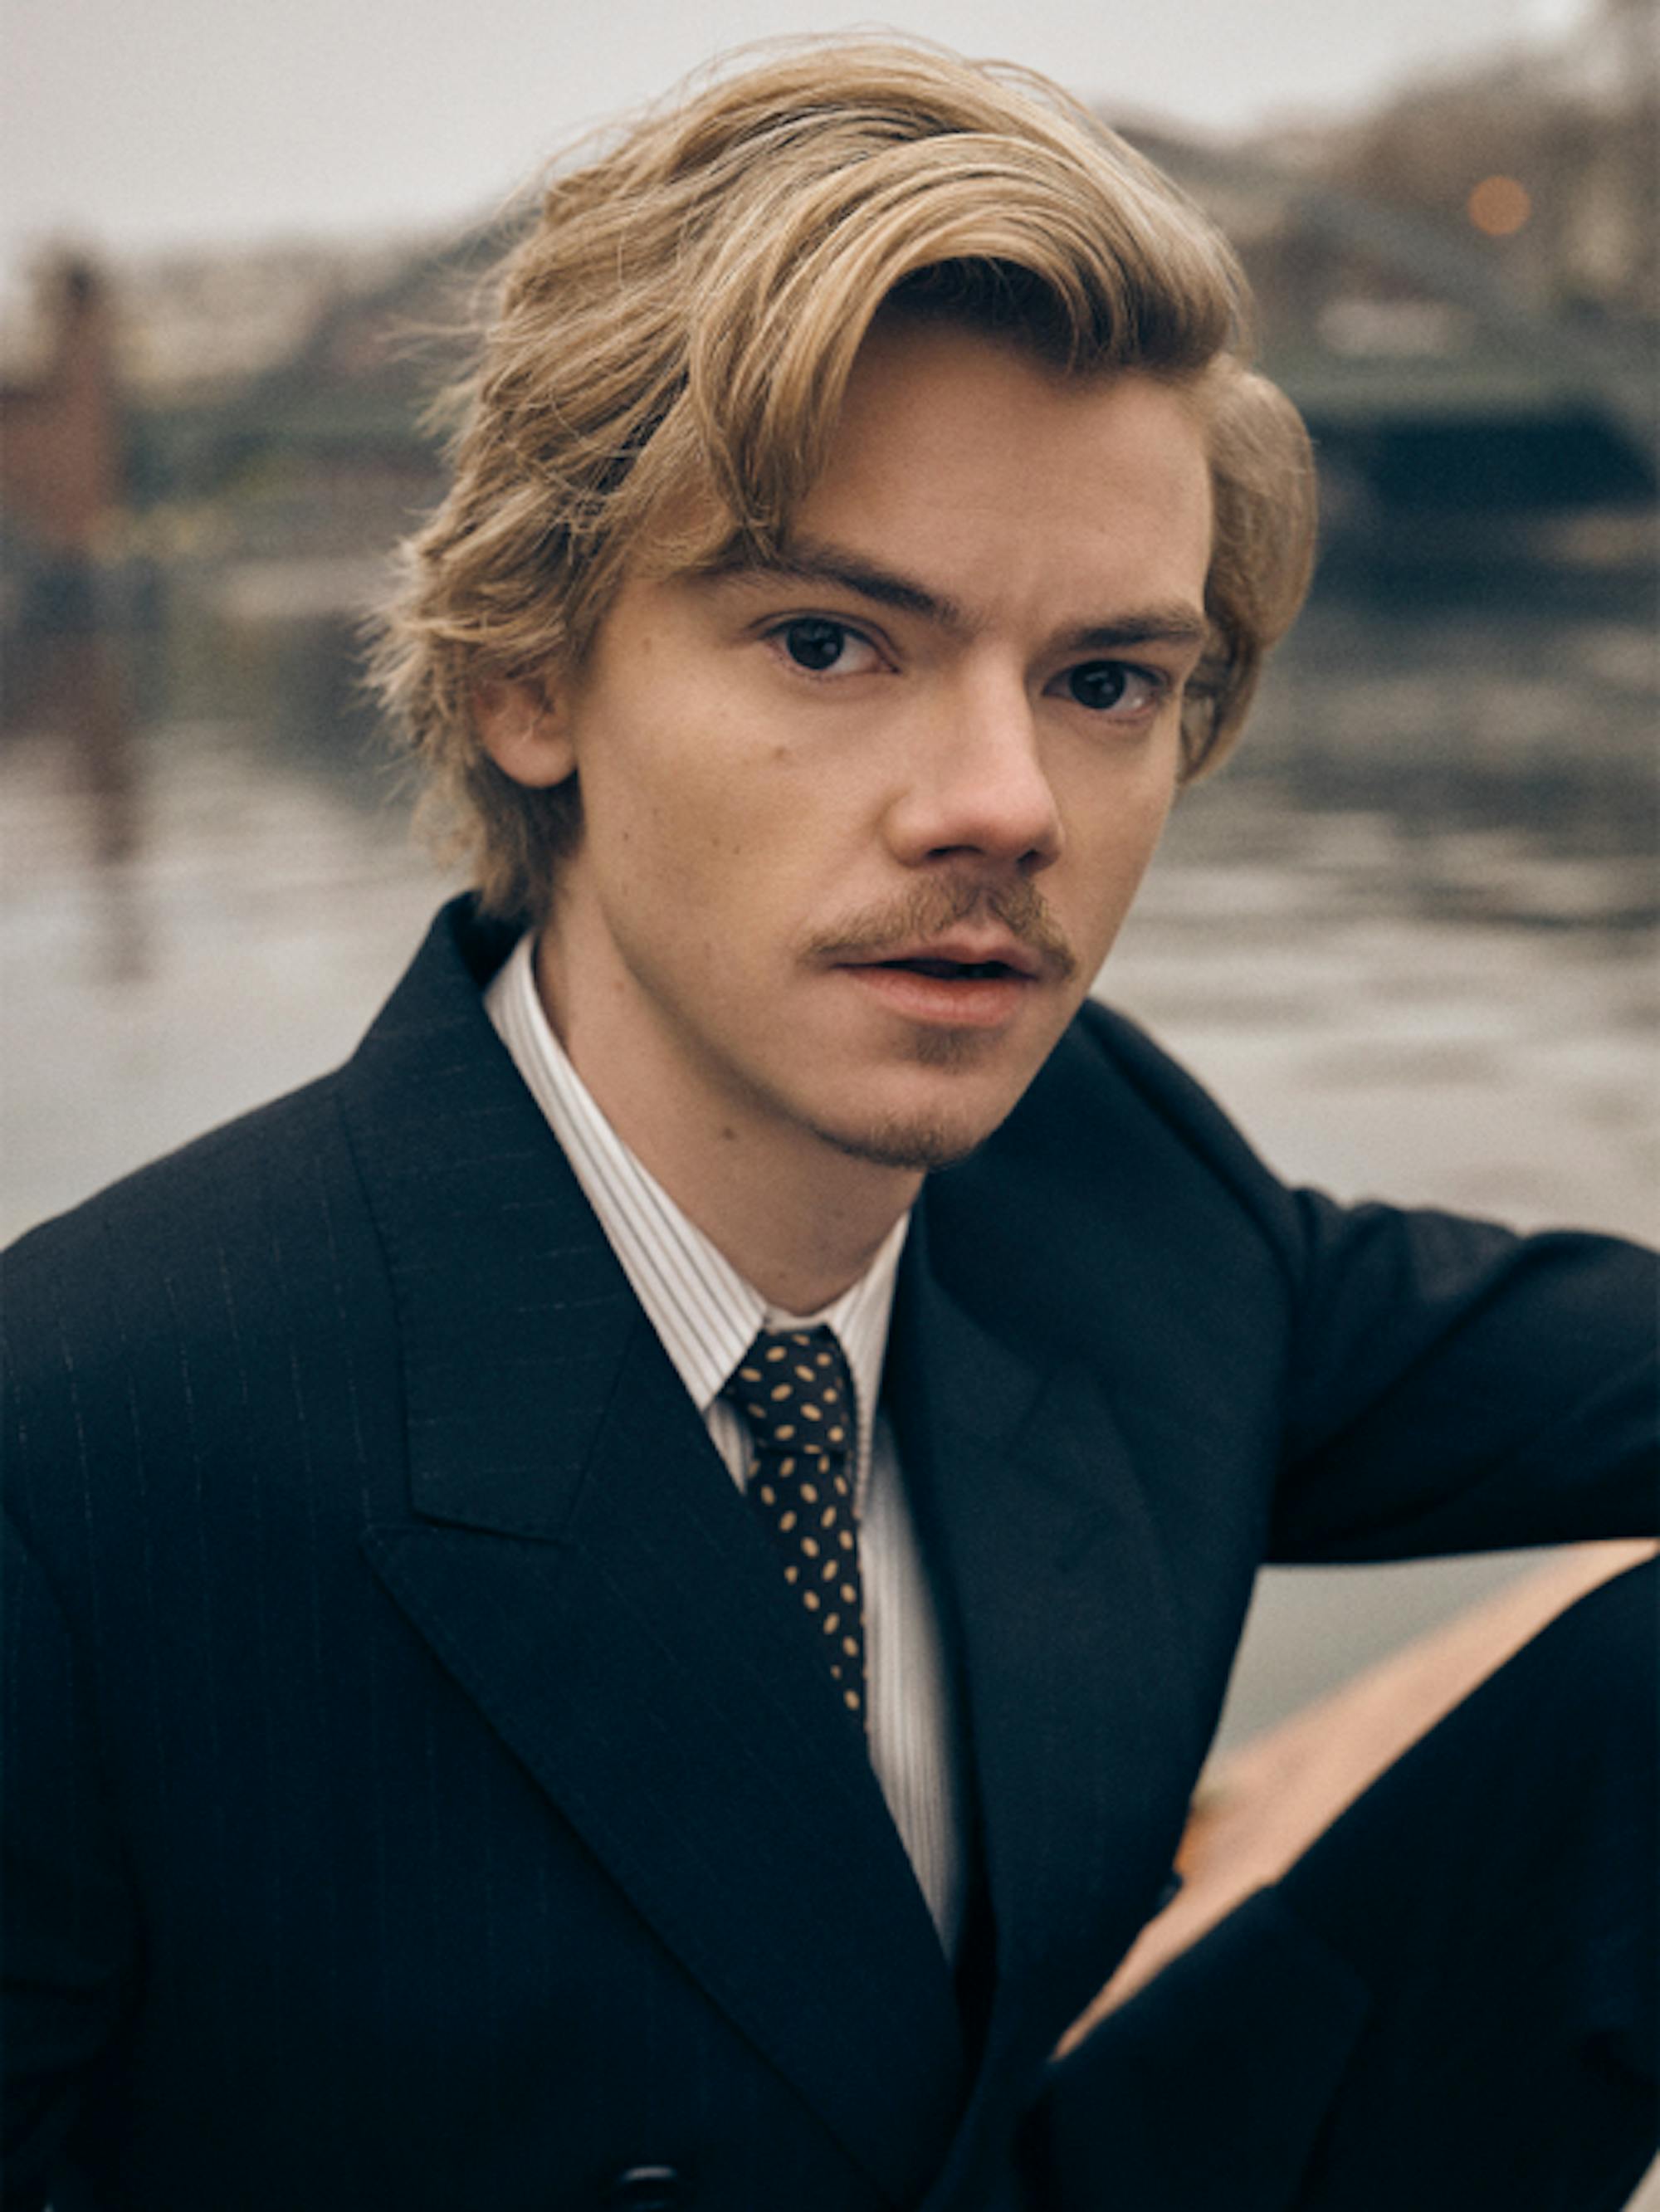 The *Queen’s Gambit* star Thomas Brodie-Sangster